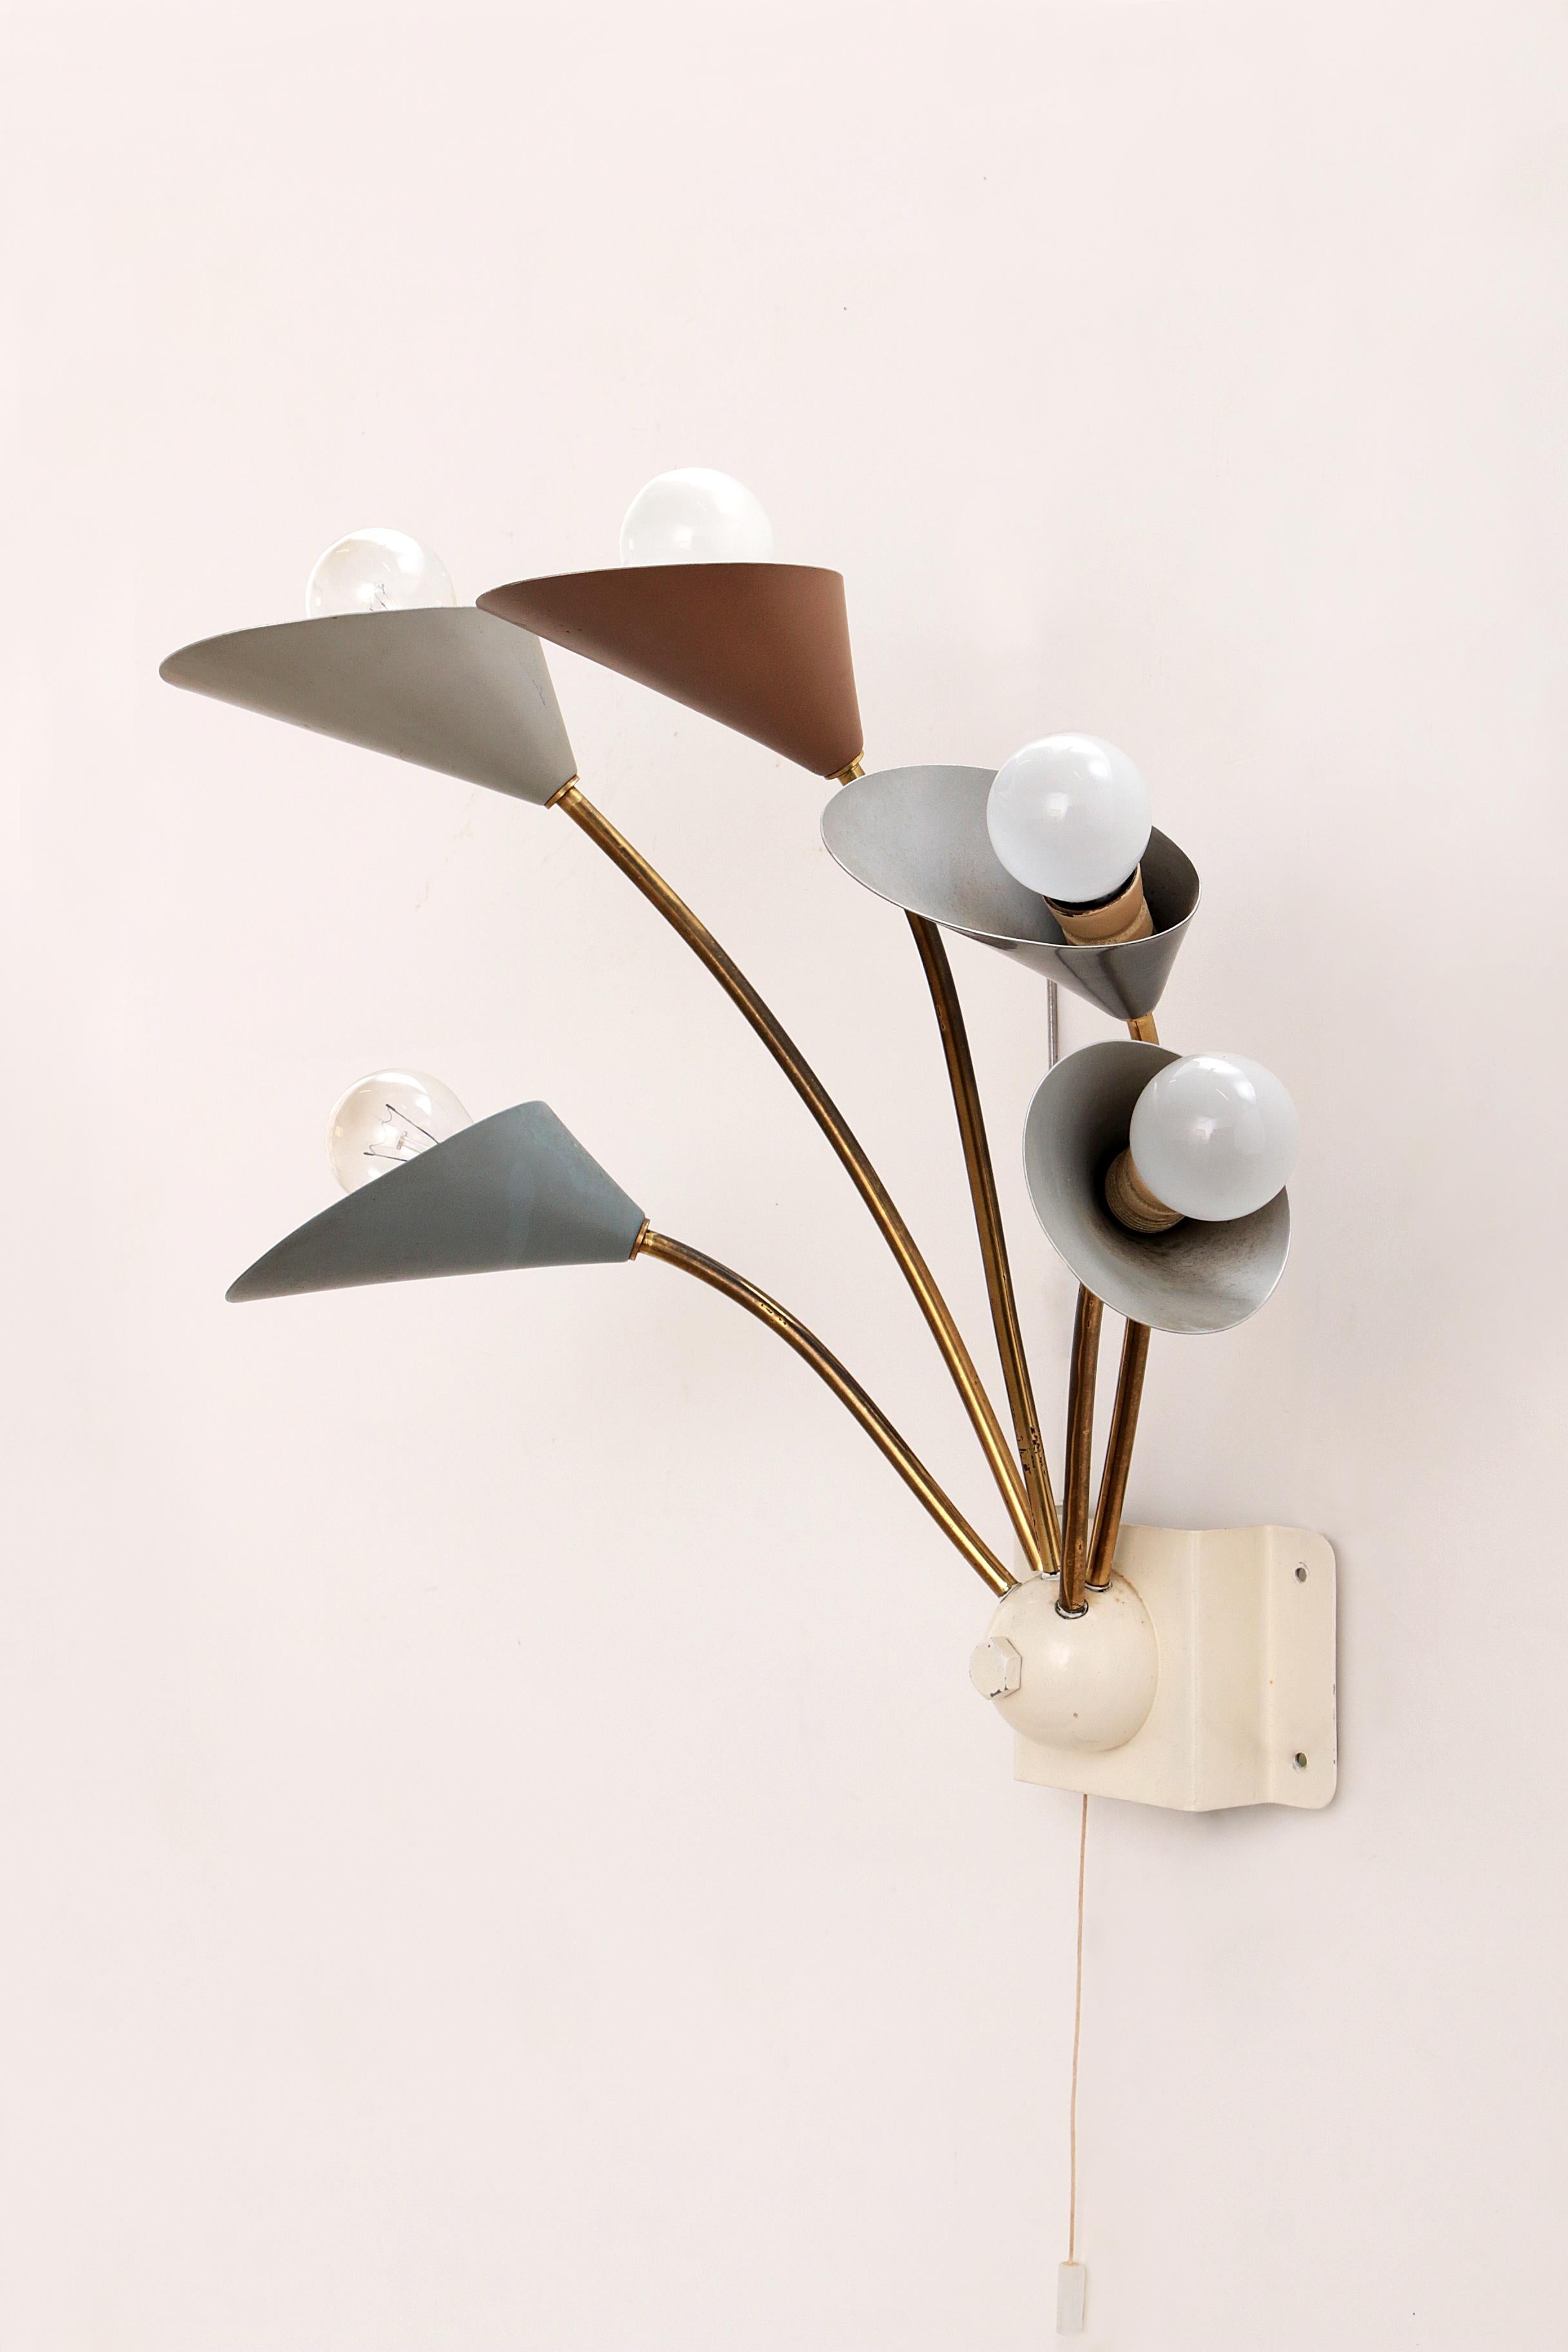 Mid-Century Modern Vintage Wall Lamp with 5 Lights - Brass Metal, 1960 Denmark For Sale